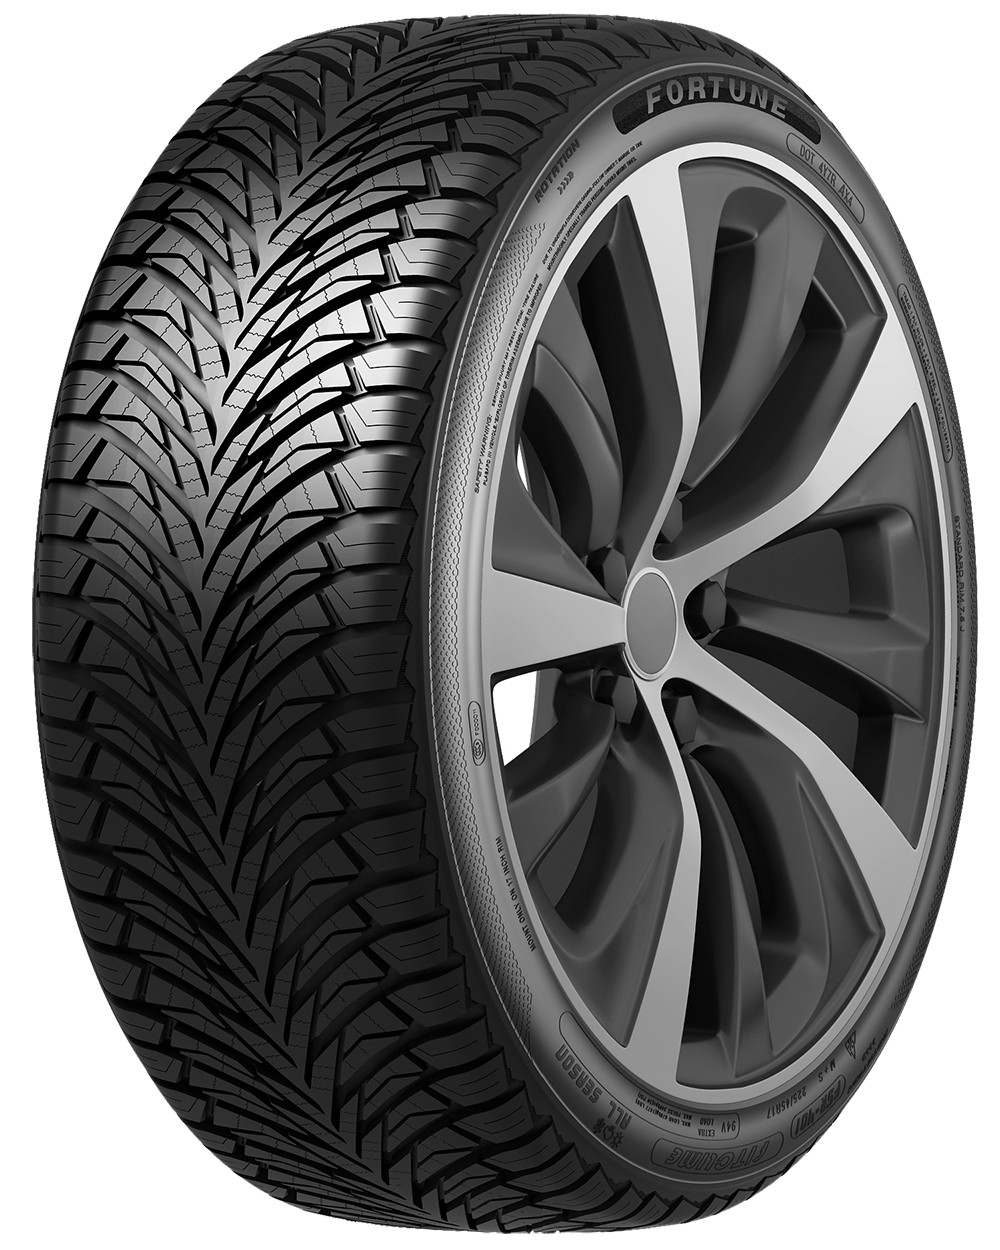 Gomme Nuove Fortune 175/65 R15 88H FITCLIME FSR-401 XL M+S pneumatici nuovi All Season